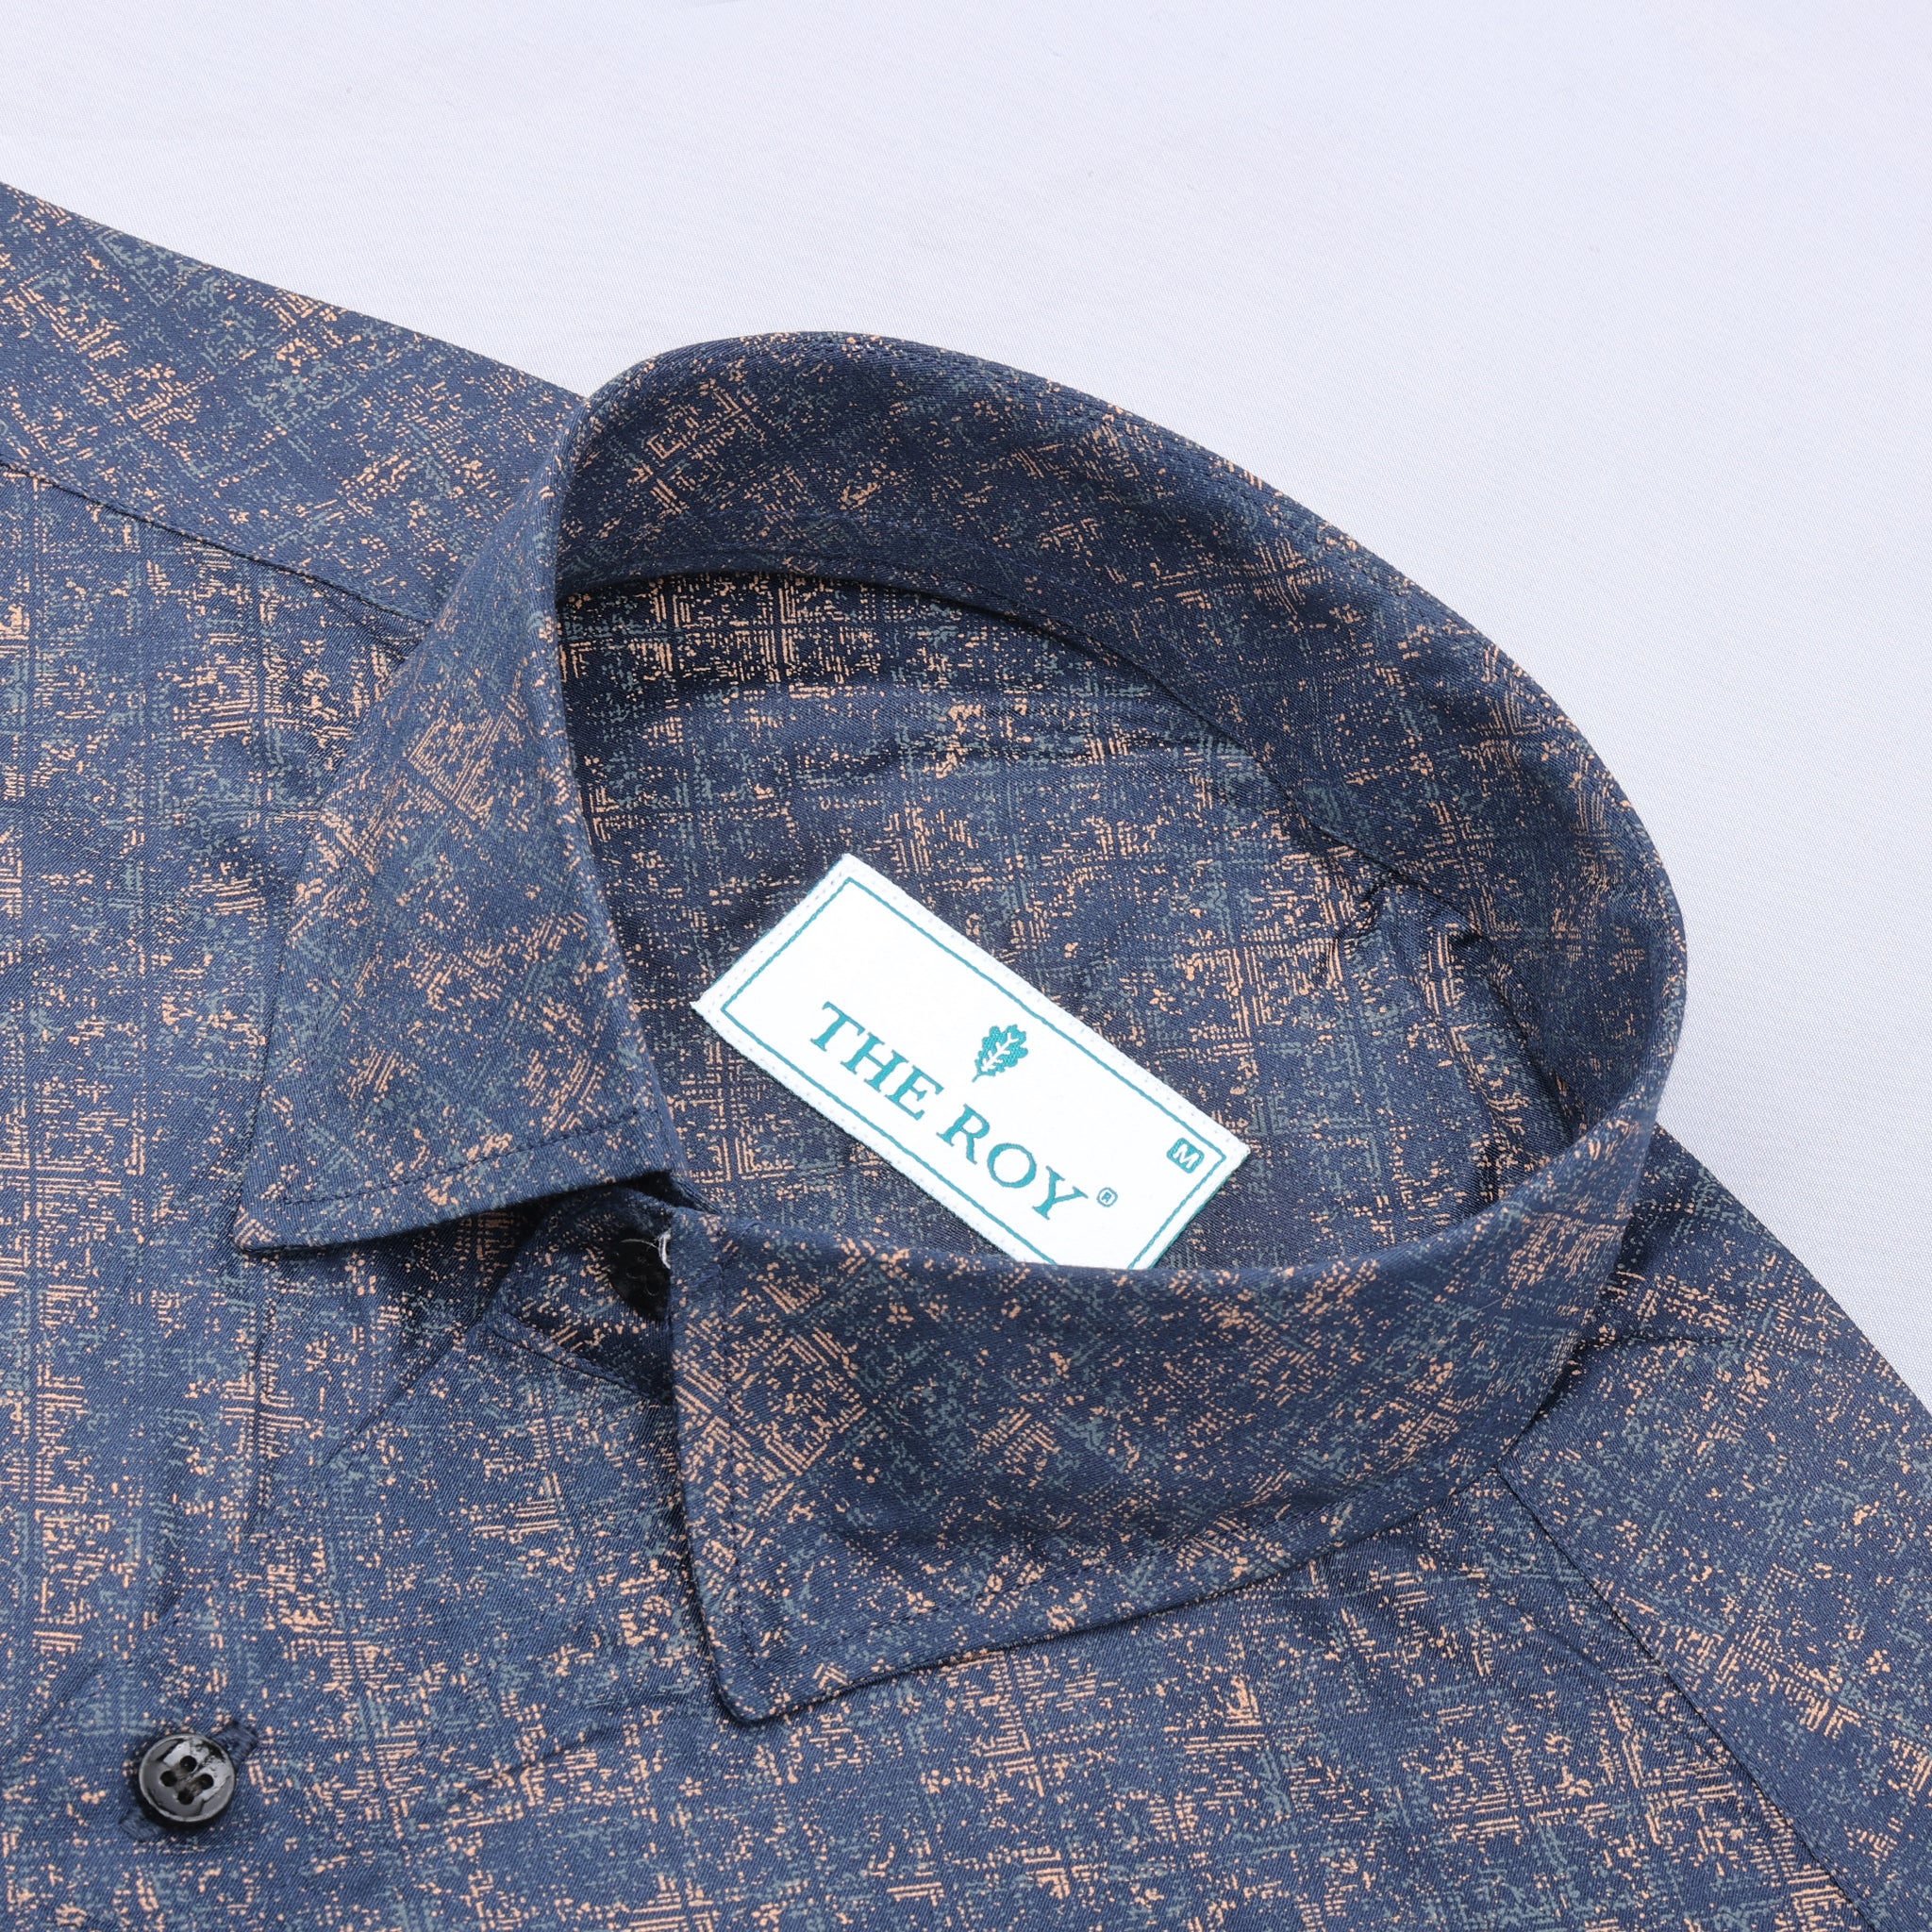 Marble Blue Luxury Printed Cotton Shirt